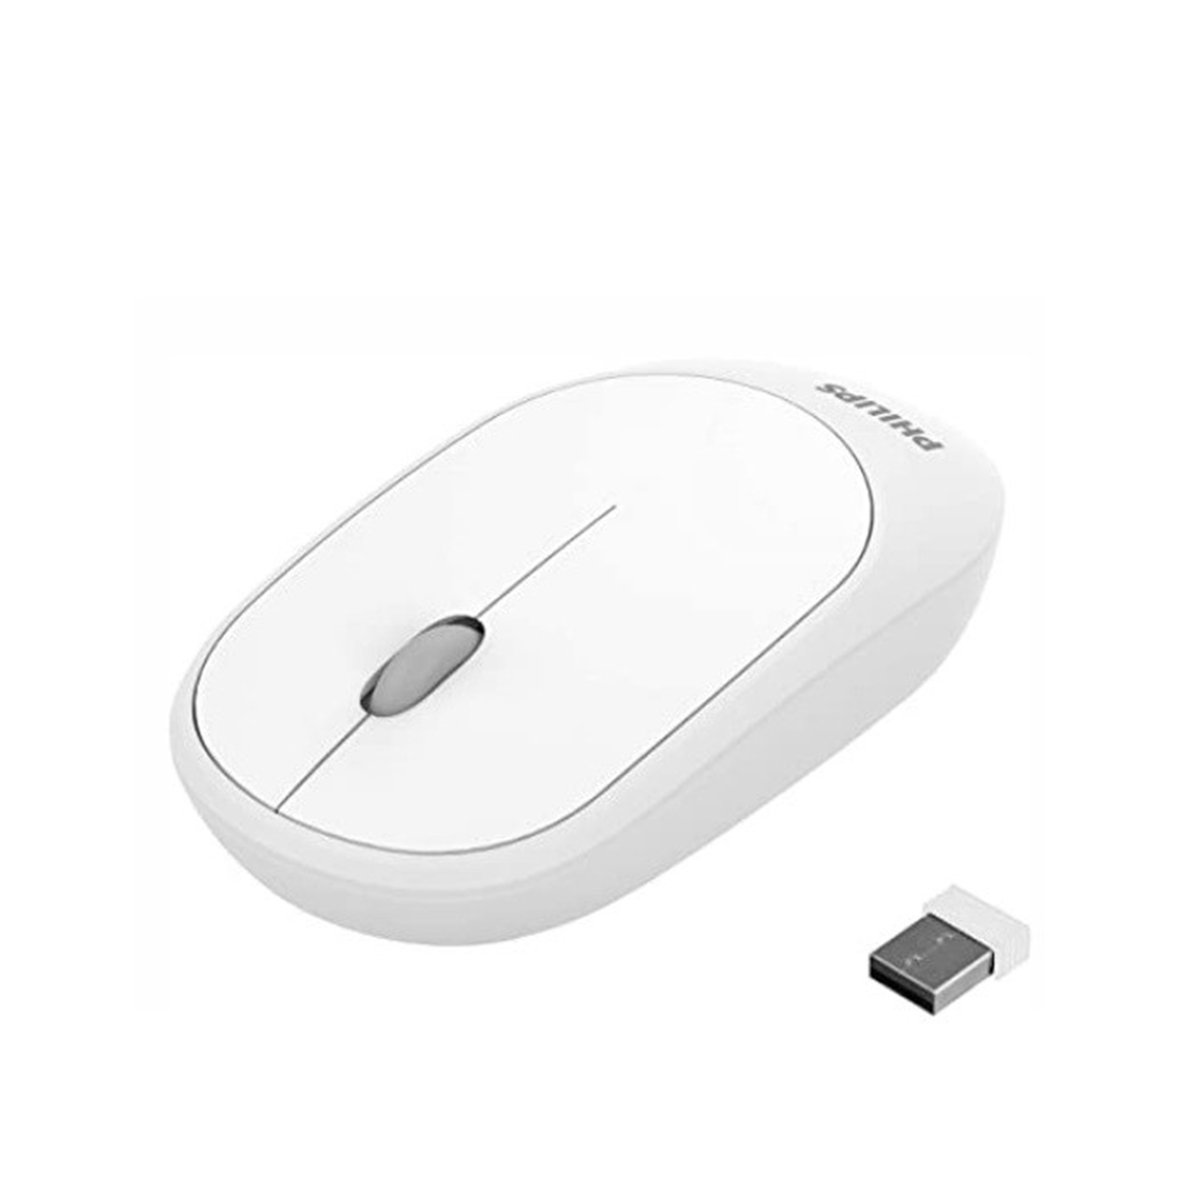 Philips Wireless Mouse SPK7314CYPI,Assorted Colors